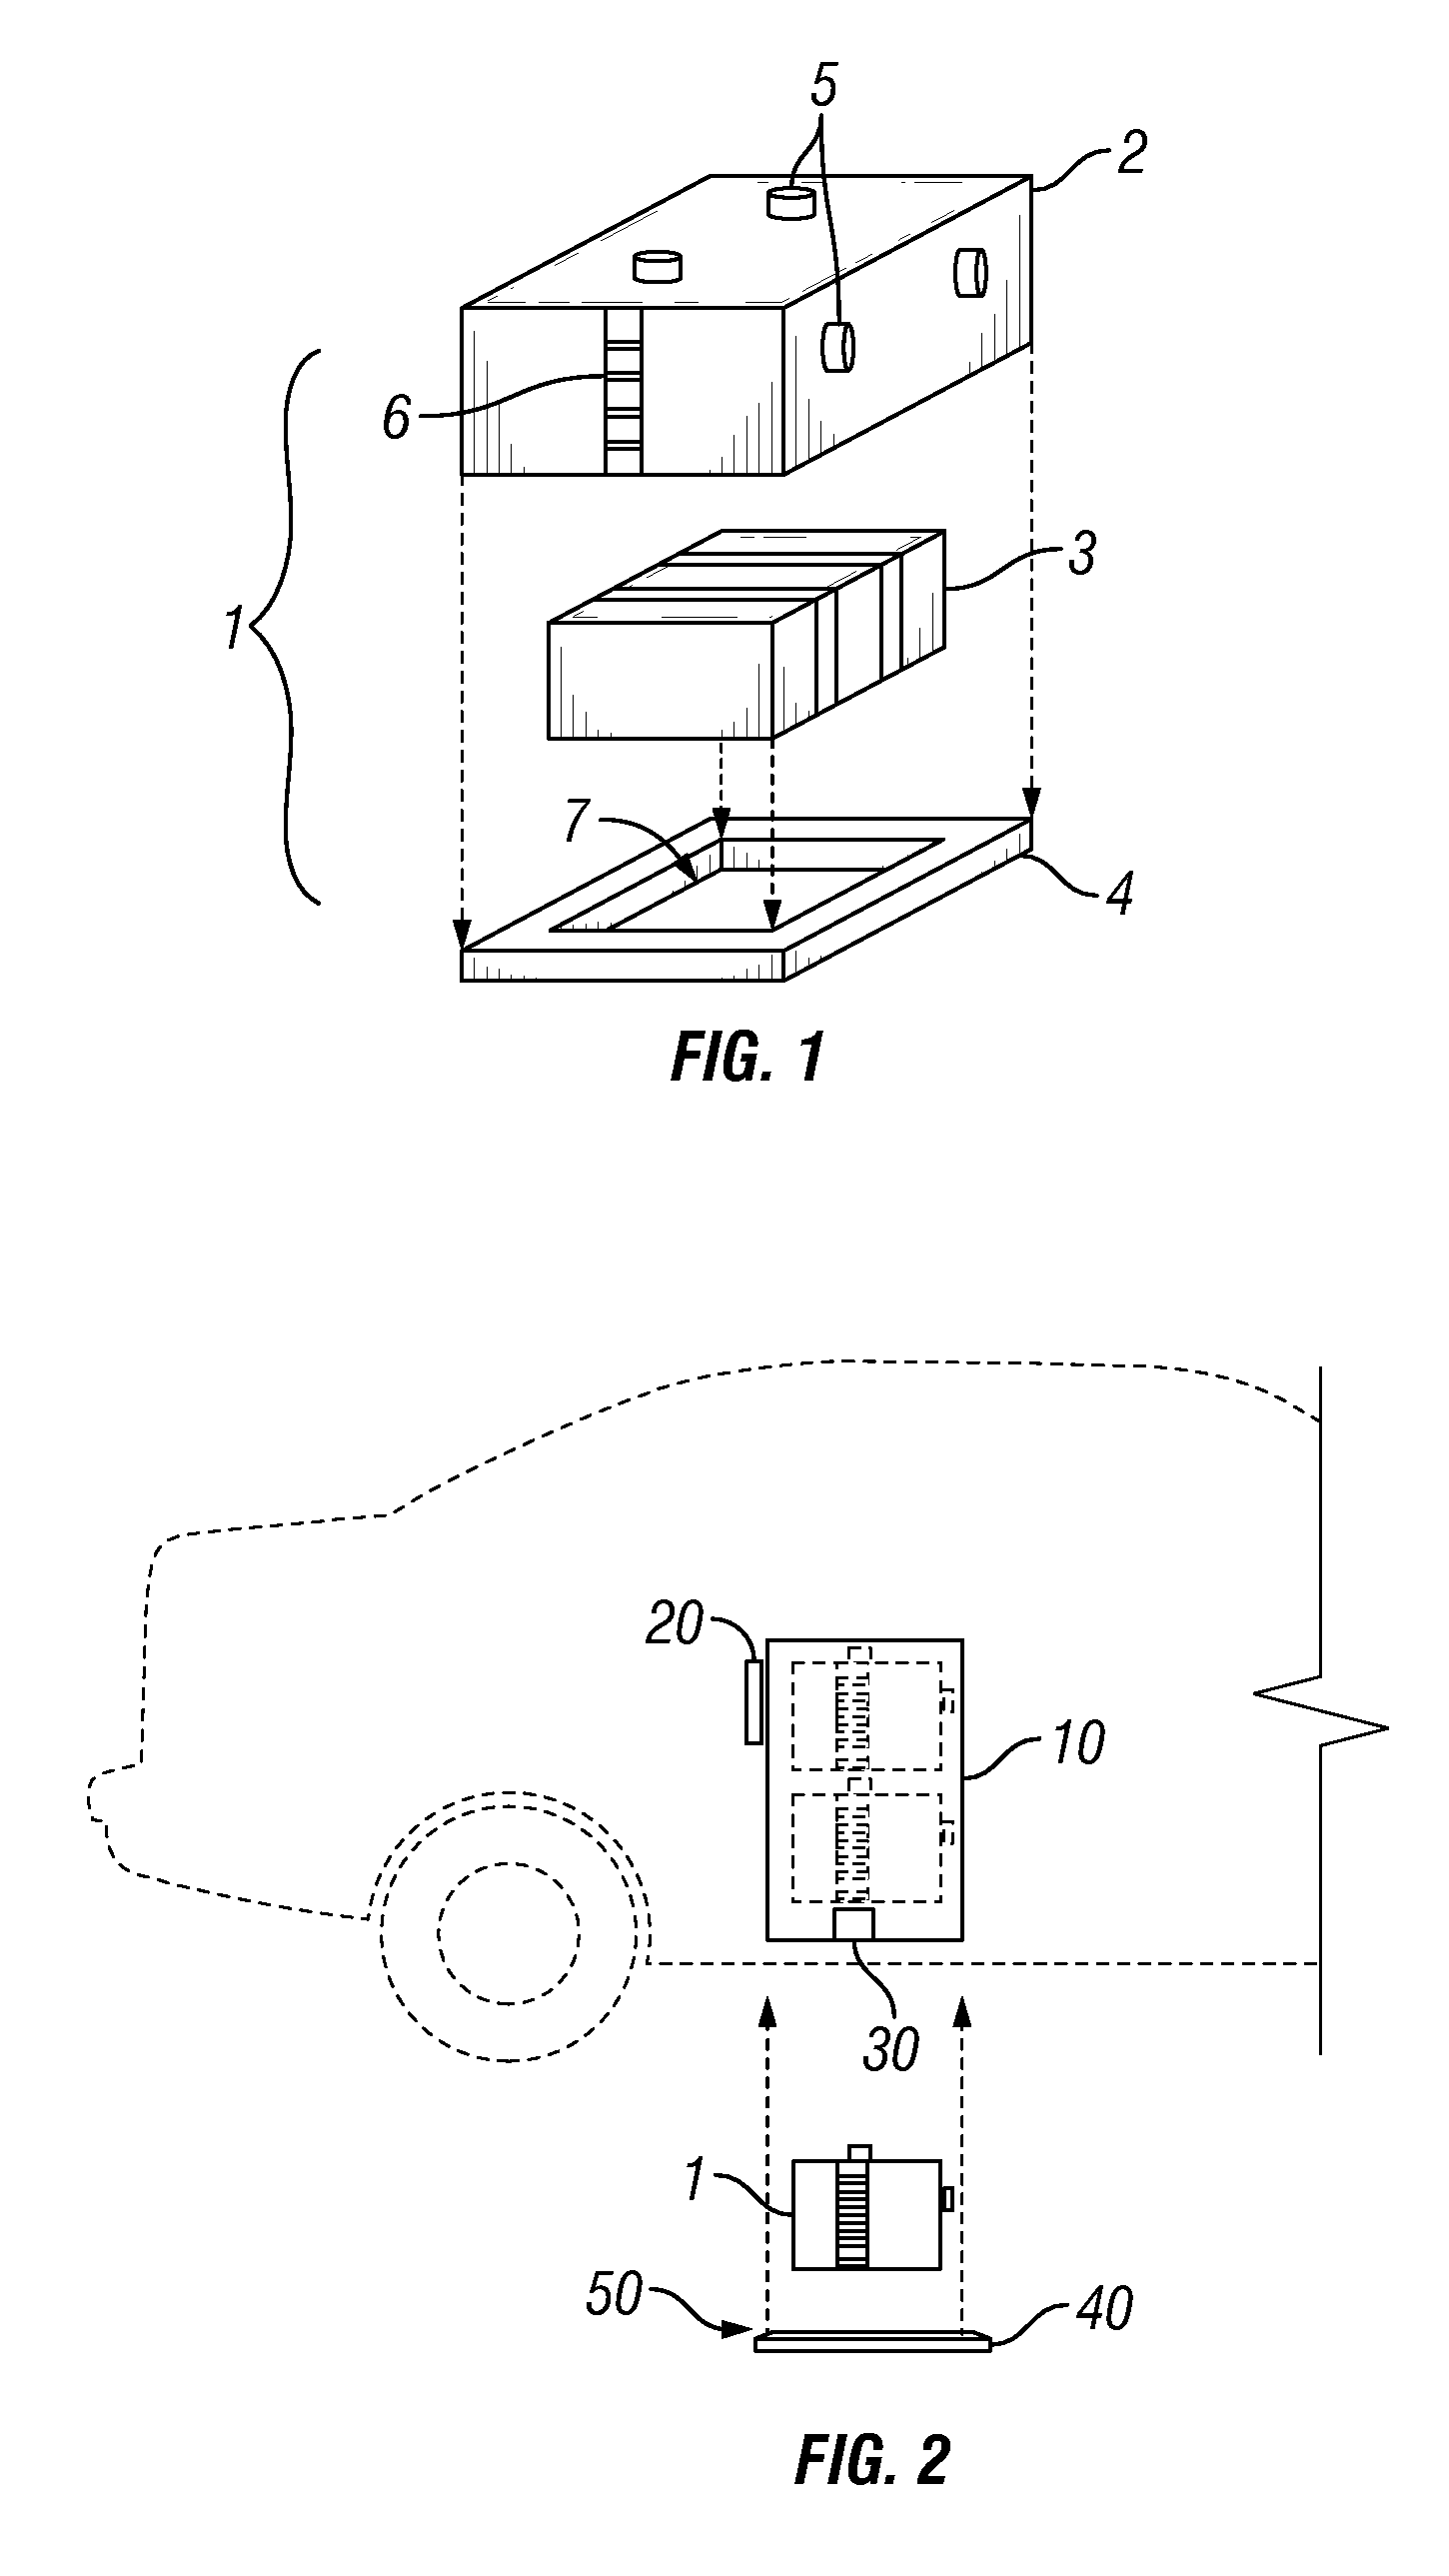 Electric vehicle battery module and replacement system